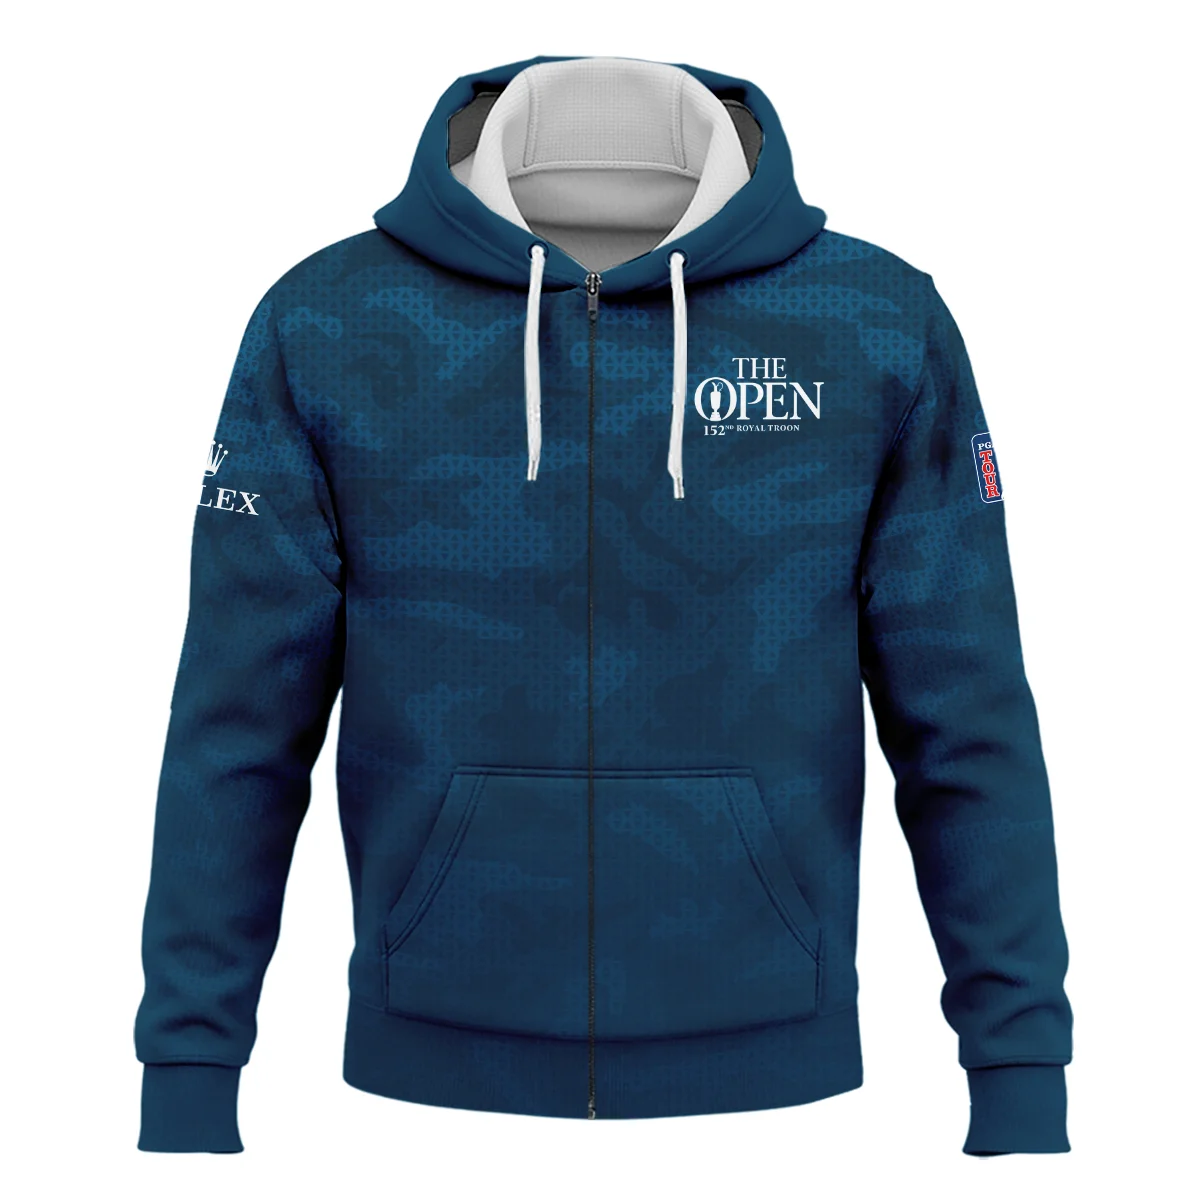 Rolex 152nd Open Championship Dark Blue Abstract Background Performance Quarter Zip Sweatshirt With Pockets All Over Prints HOTOP260624A02ROXTS